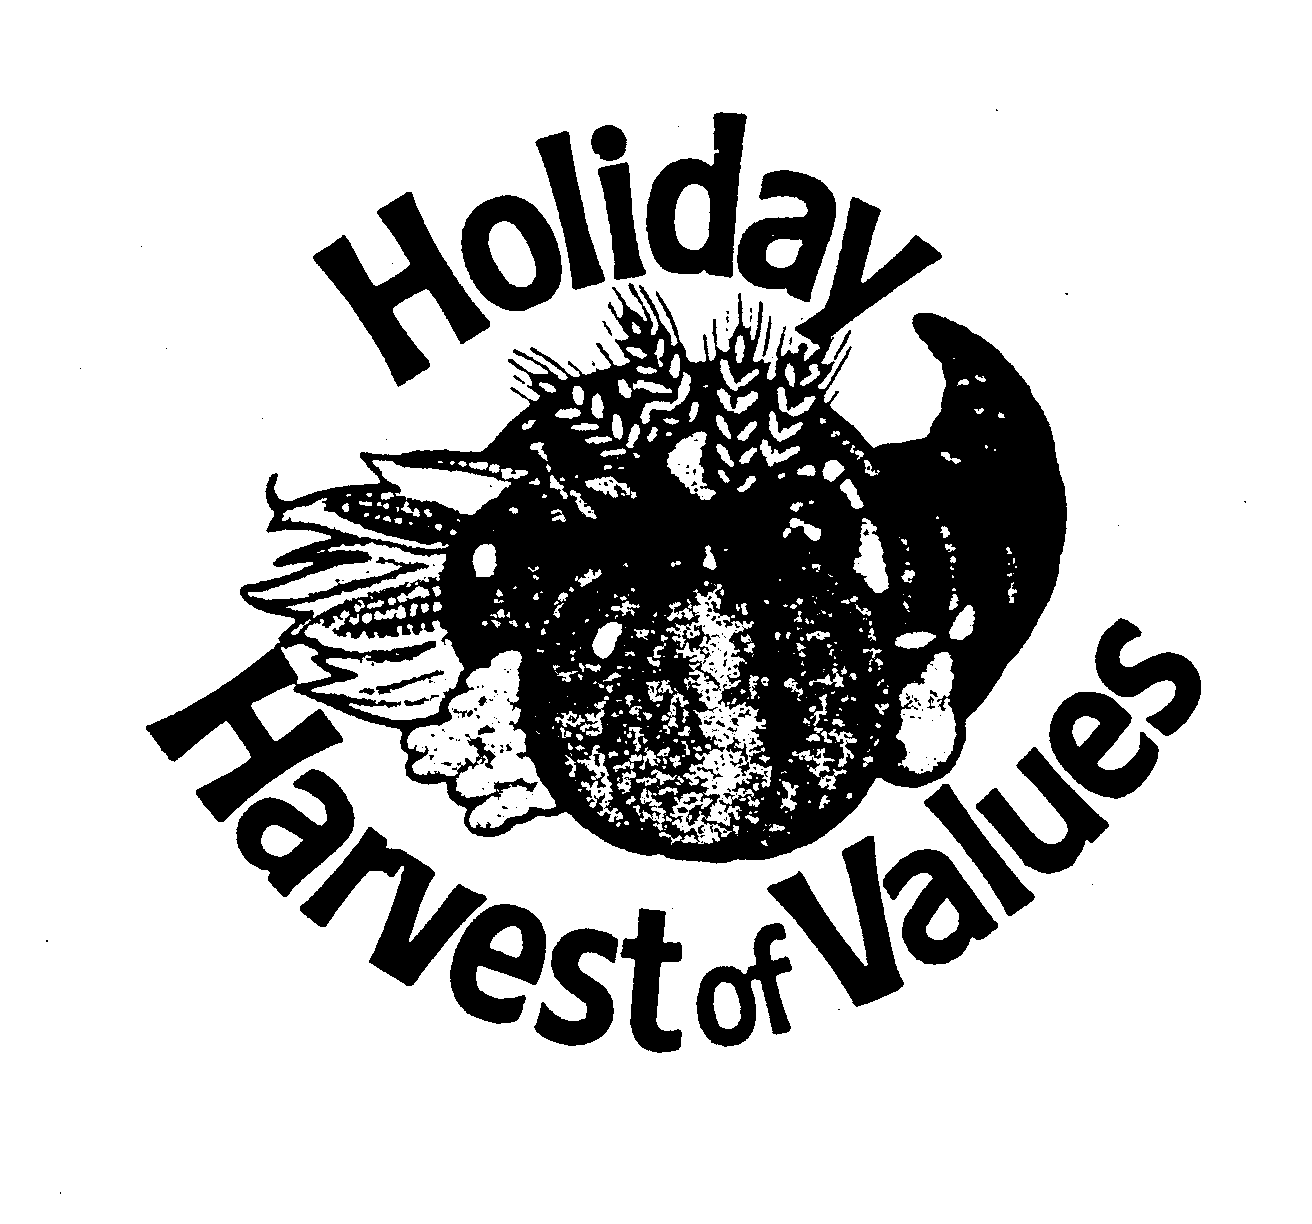  HOLIDAY HARVEST OF VALUES